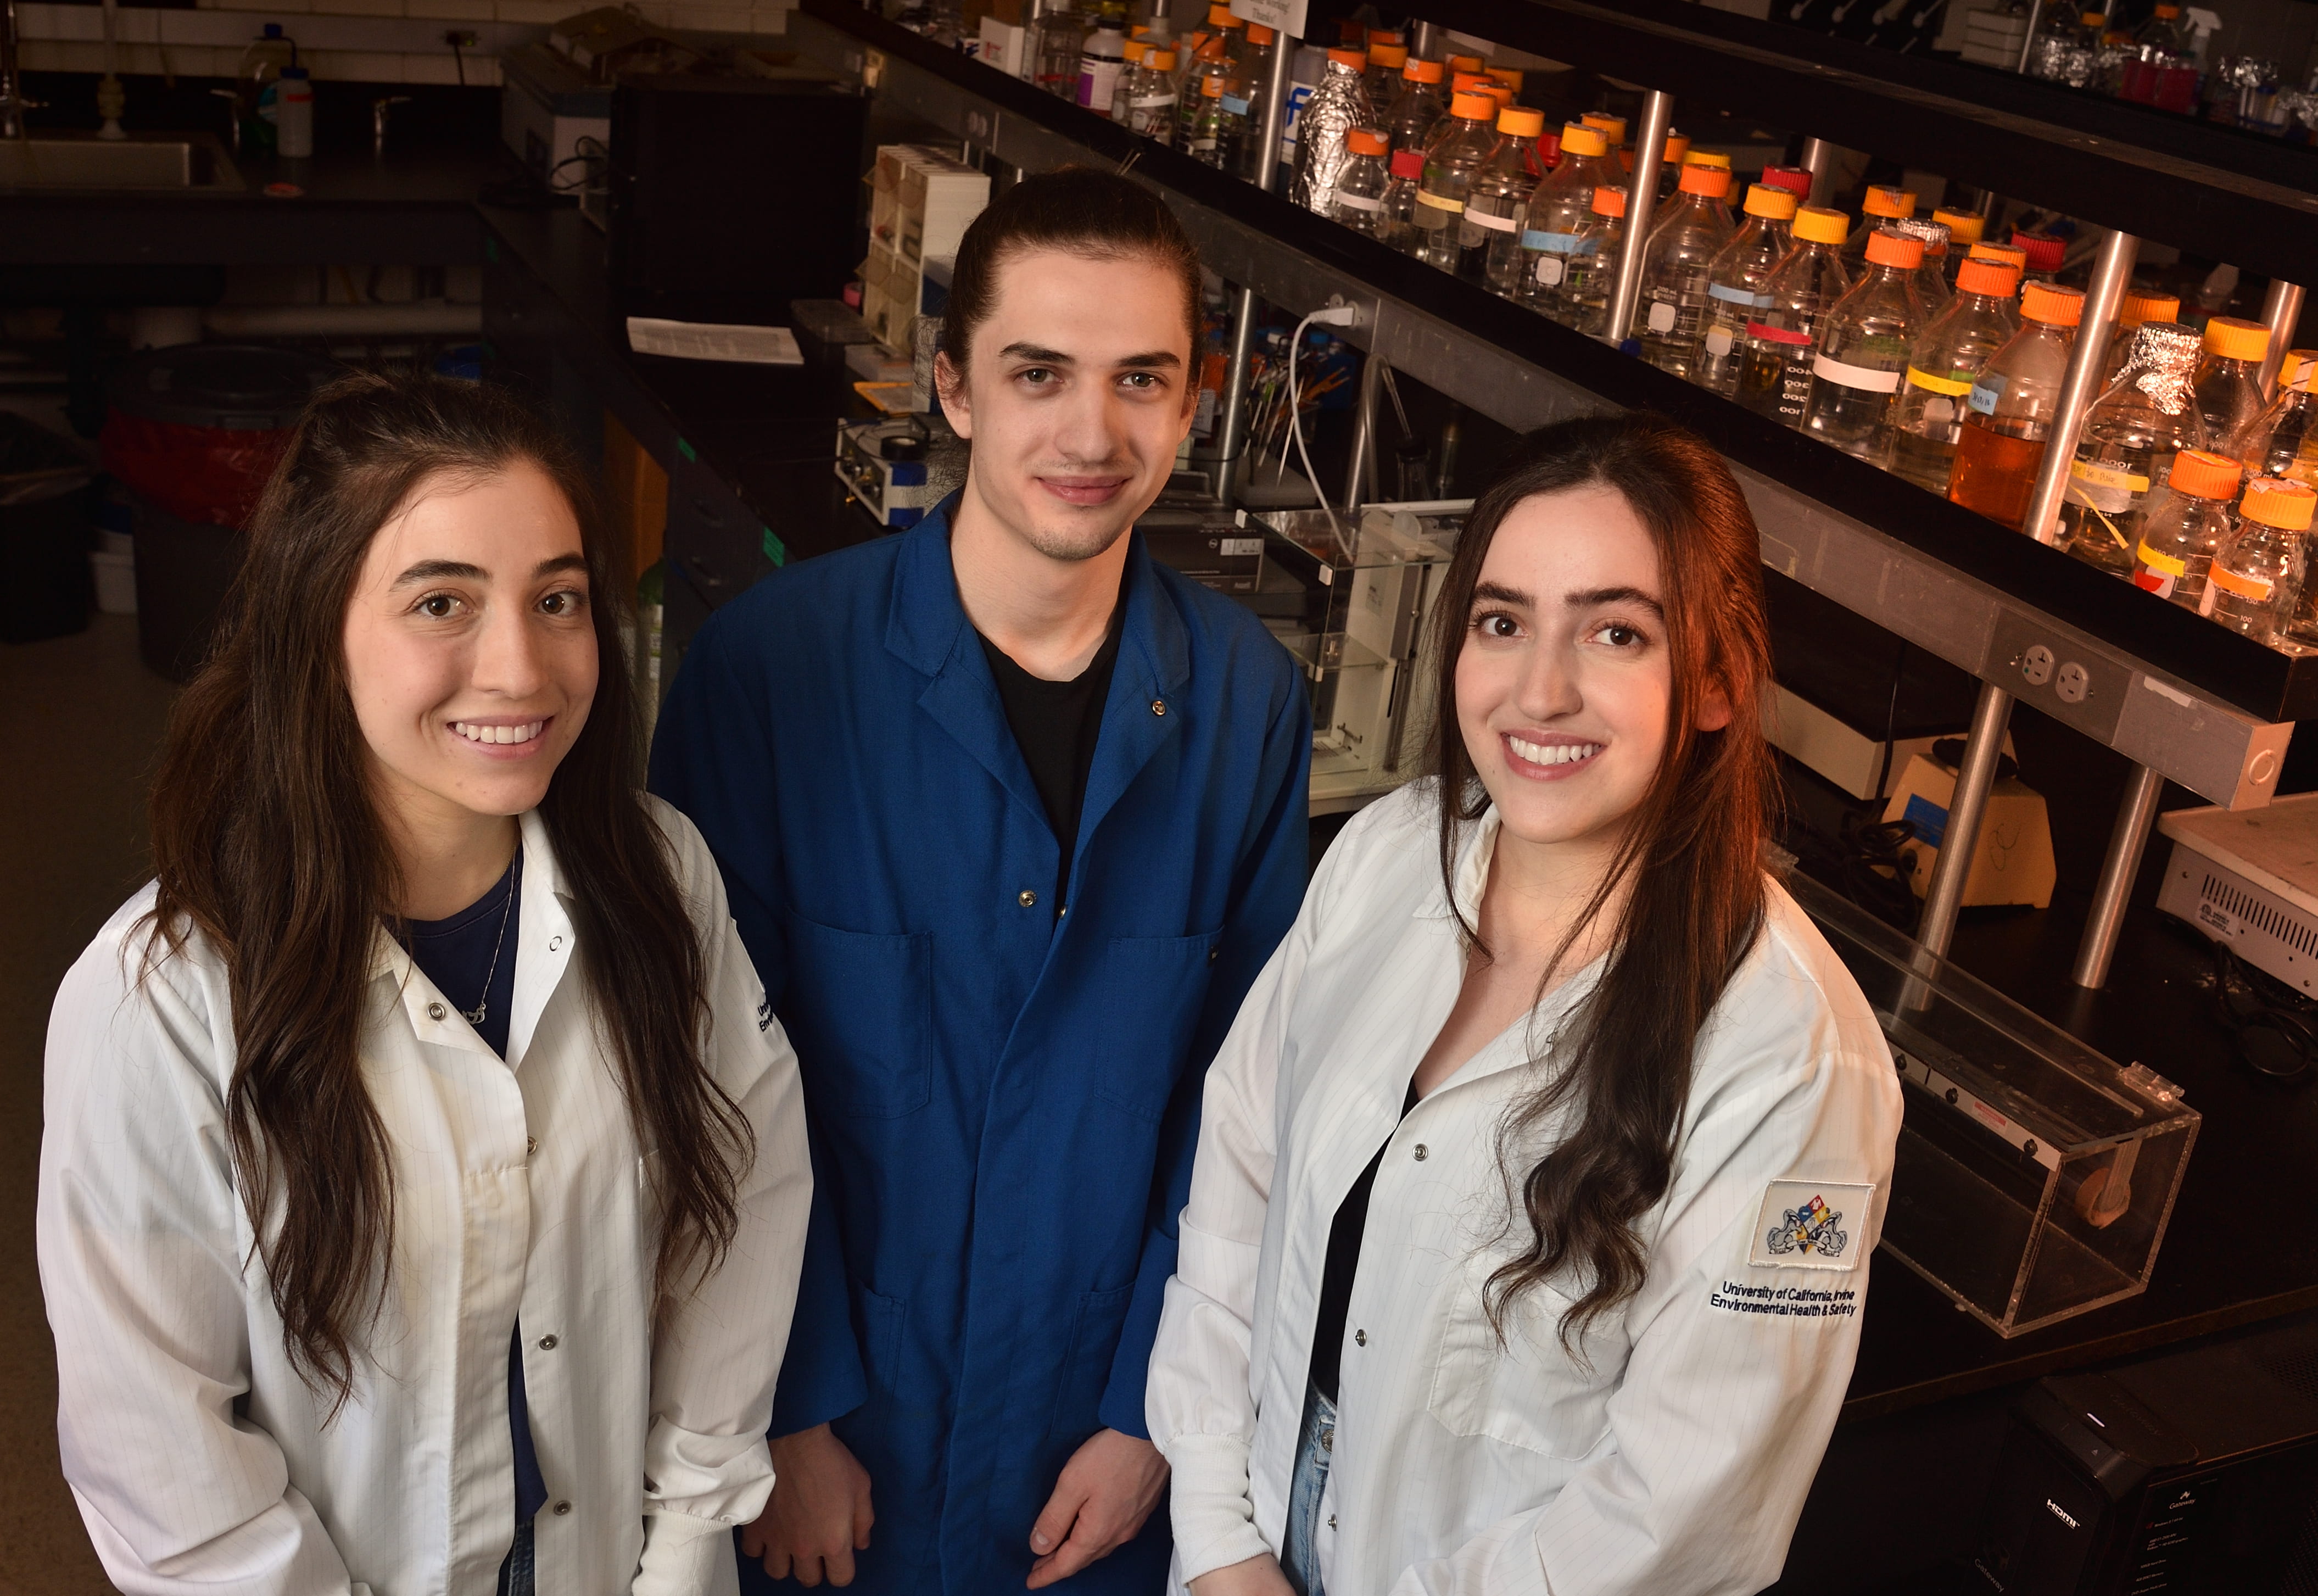 Brother and sisters, all UCI Department of Pharmaceutical Sciences grad students. From left, Wedad Alhassen, Sammy Alhassen and Lamees Alhassen.